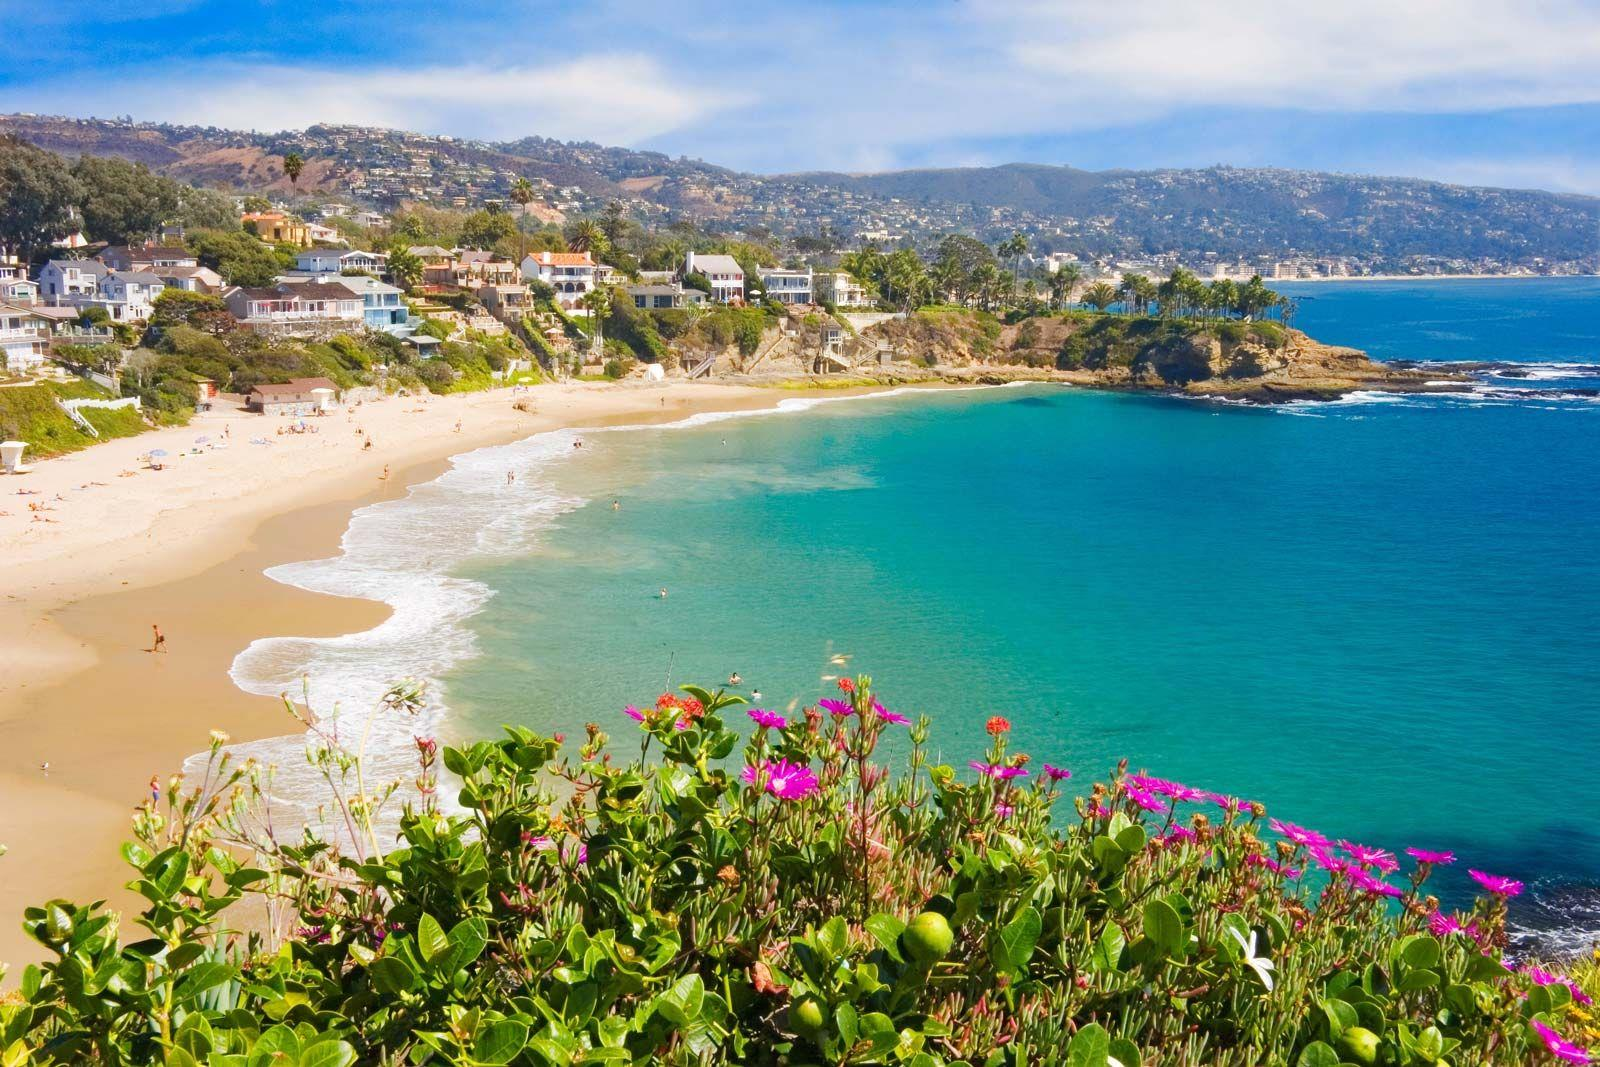 Cover Image for List of 10 best beaches in California